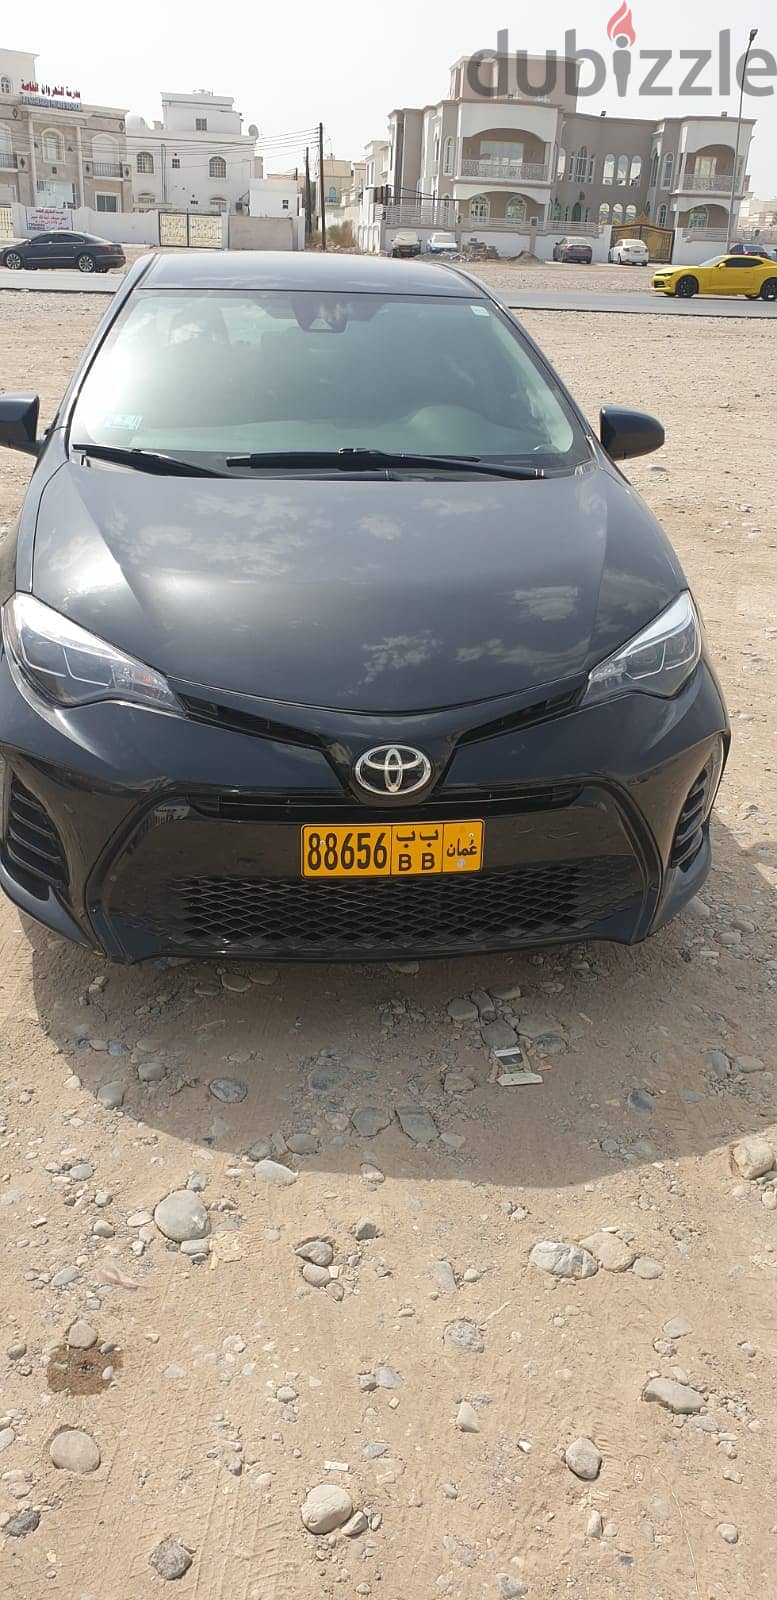 COROLLA CAR WANT TO SELL 1